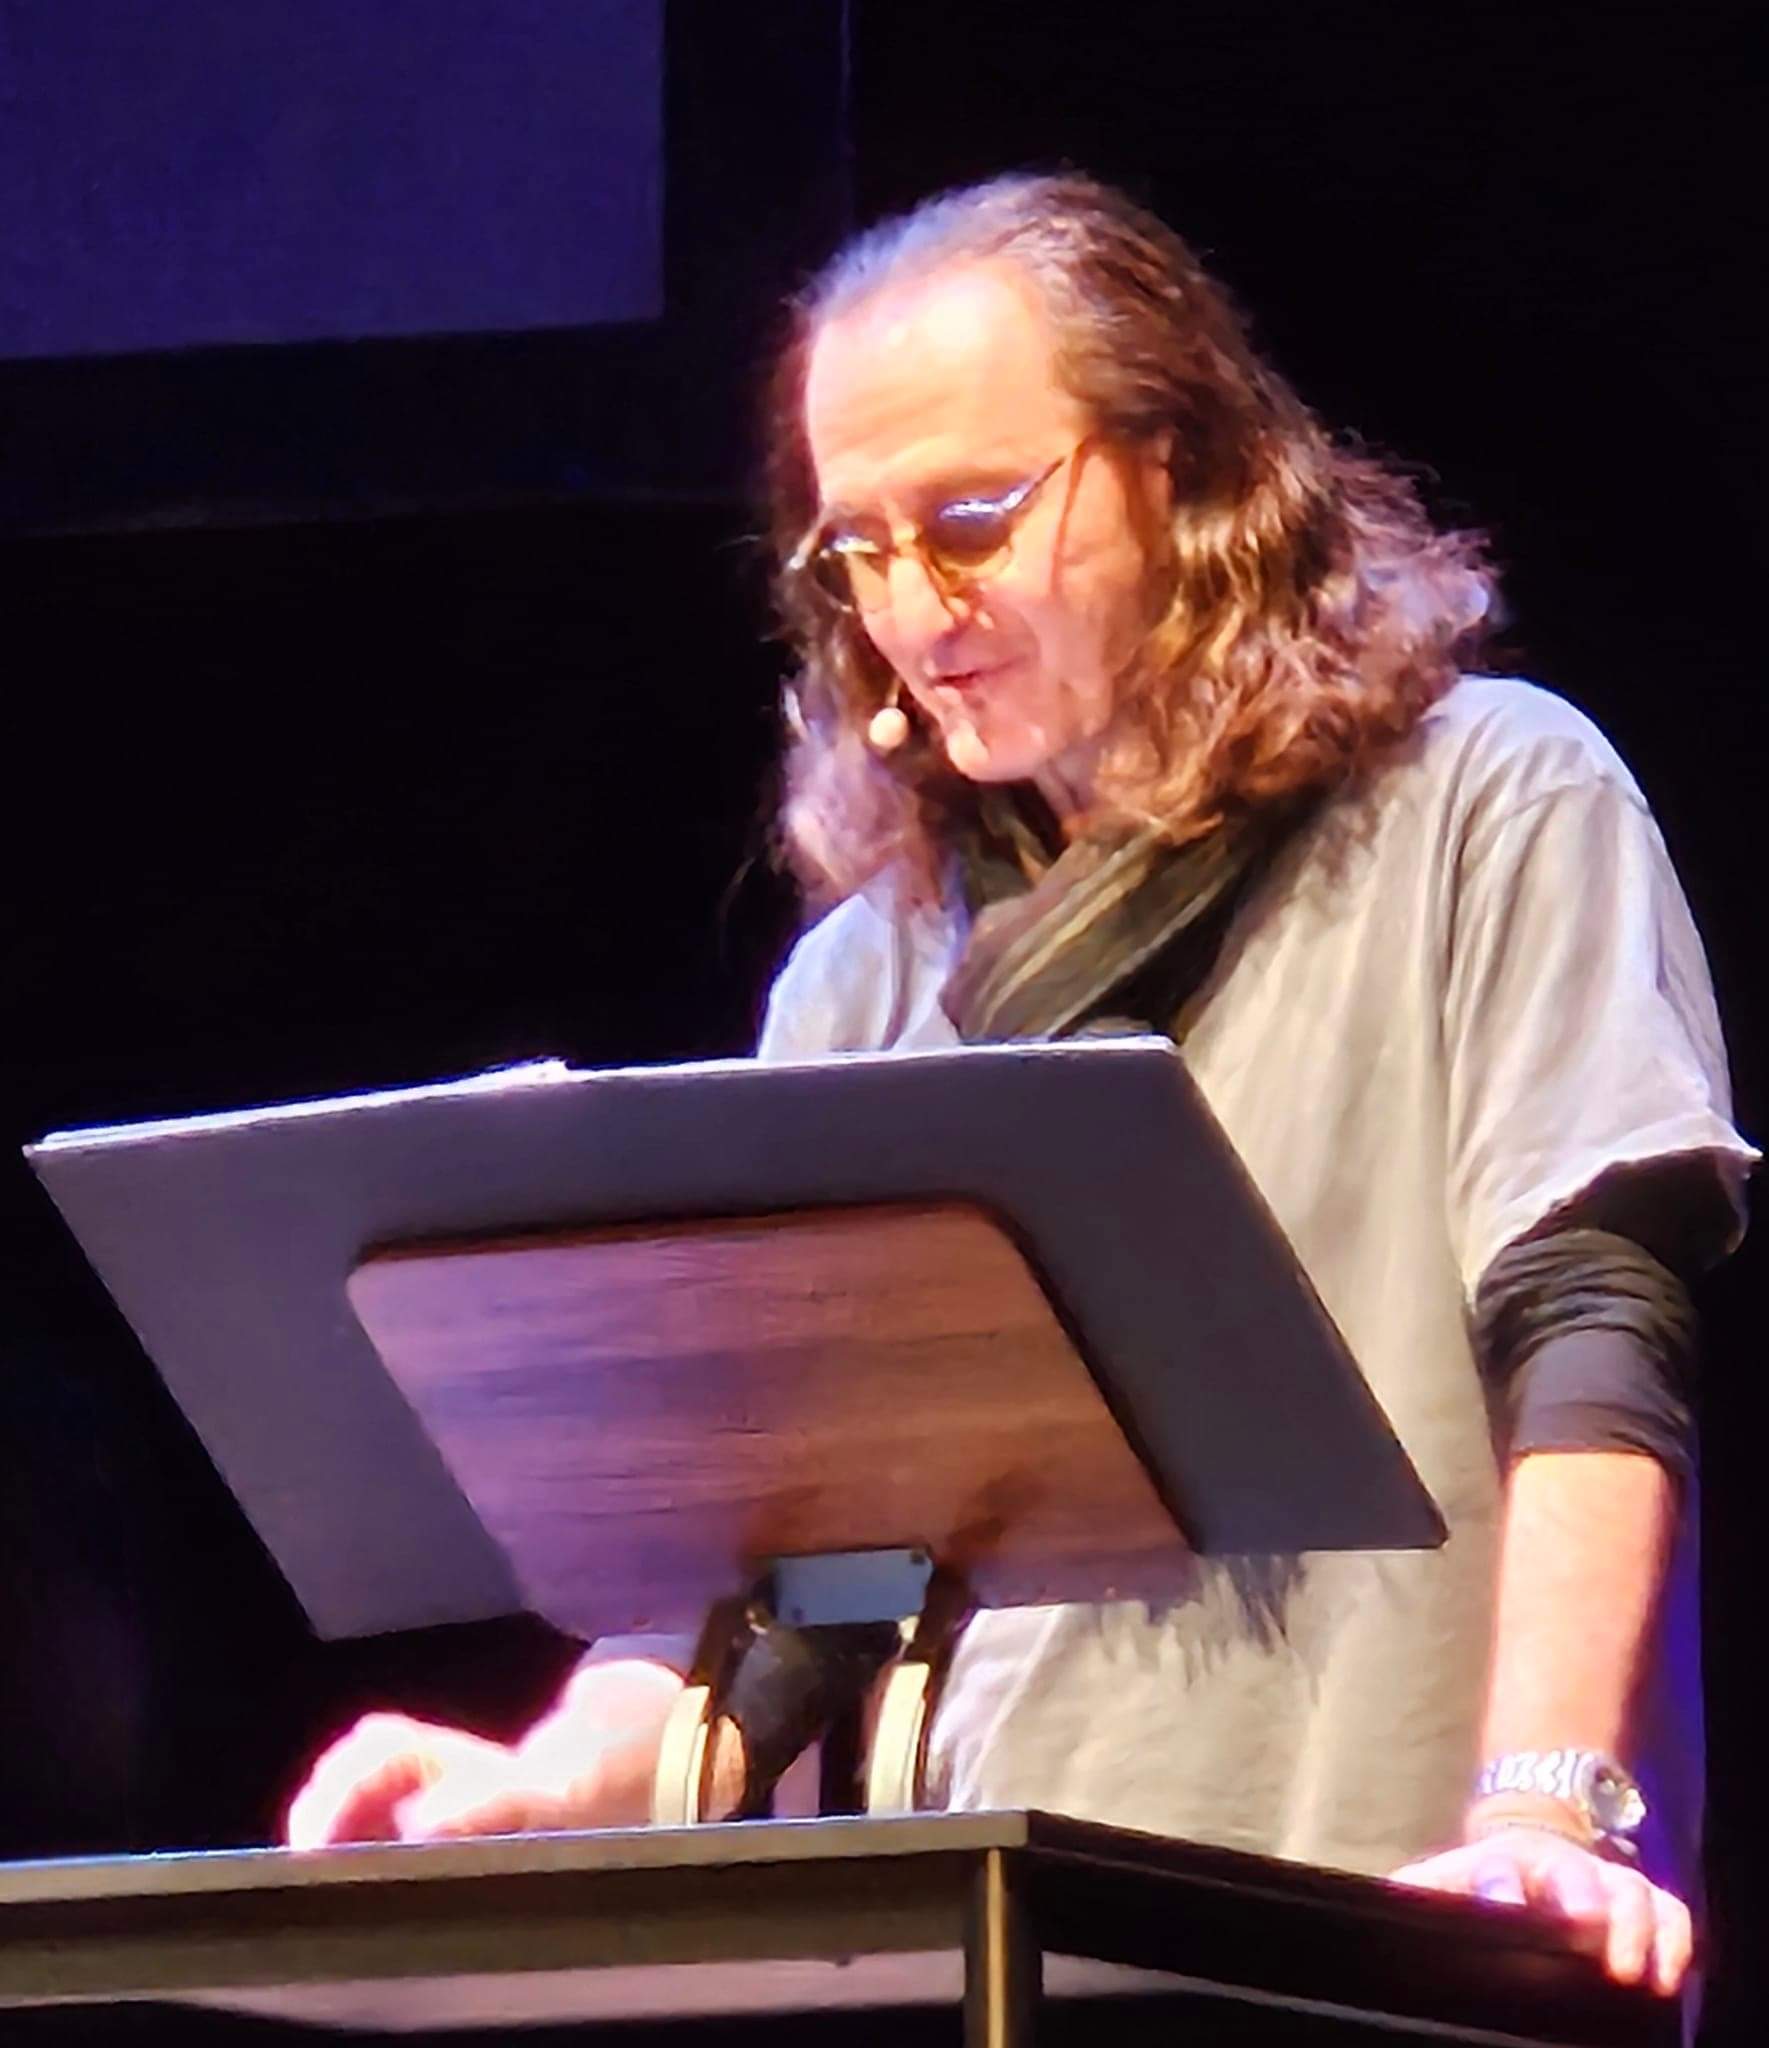 Geddy Lee 'My Effin' Life In Conversation' Tour Pictures - Sheffield City Hall - Sheffield, UK 12/13/2023